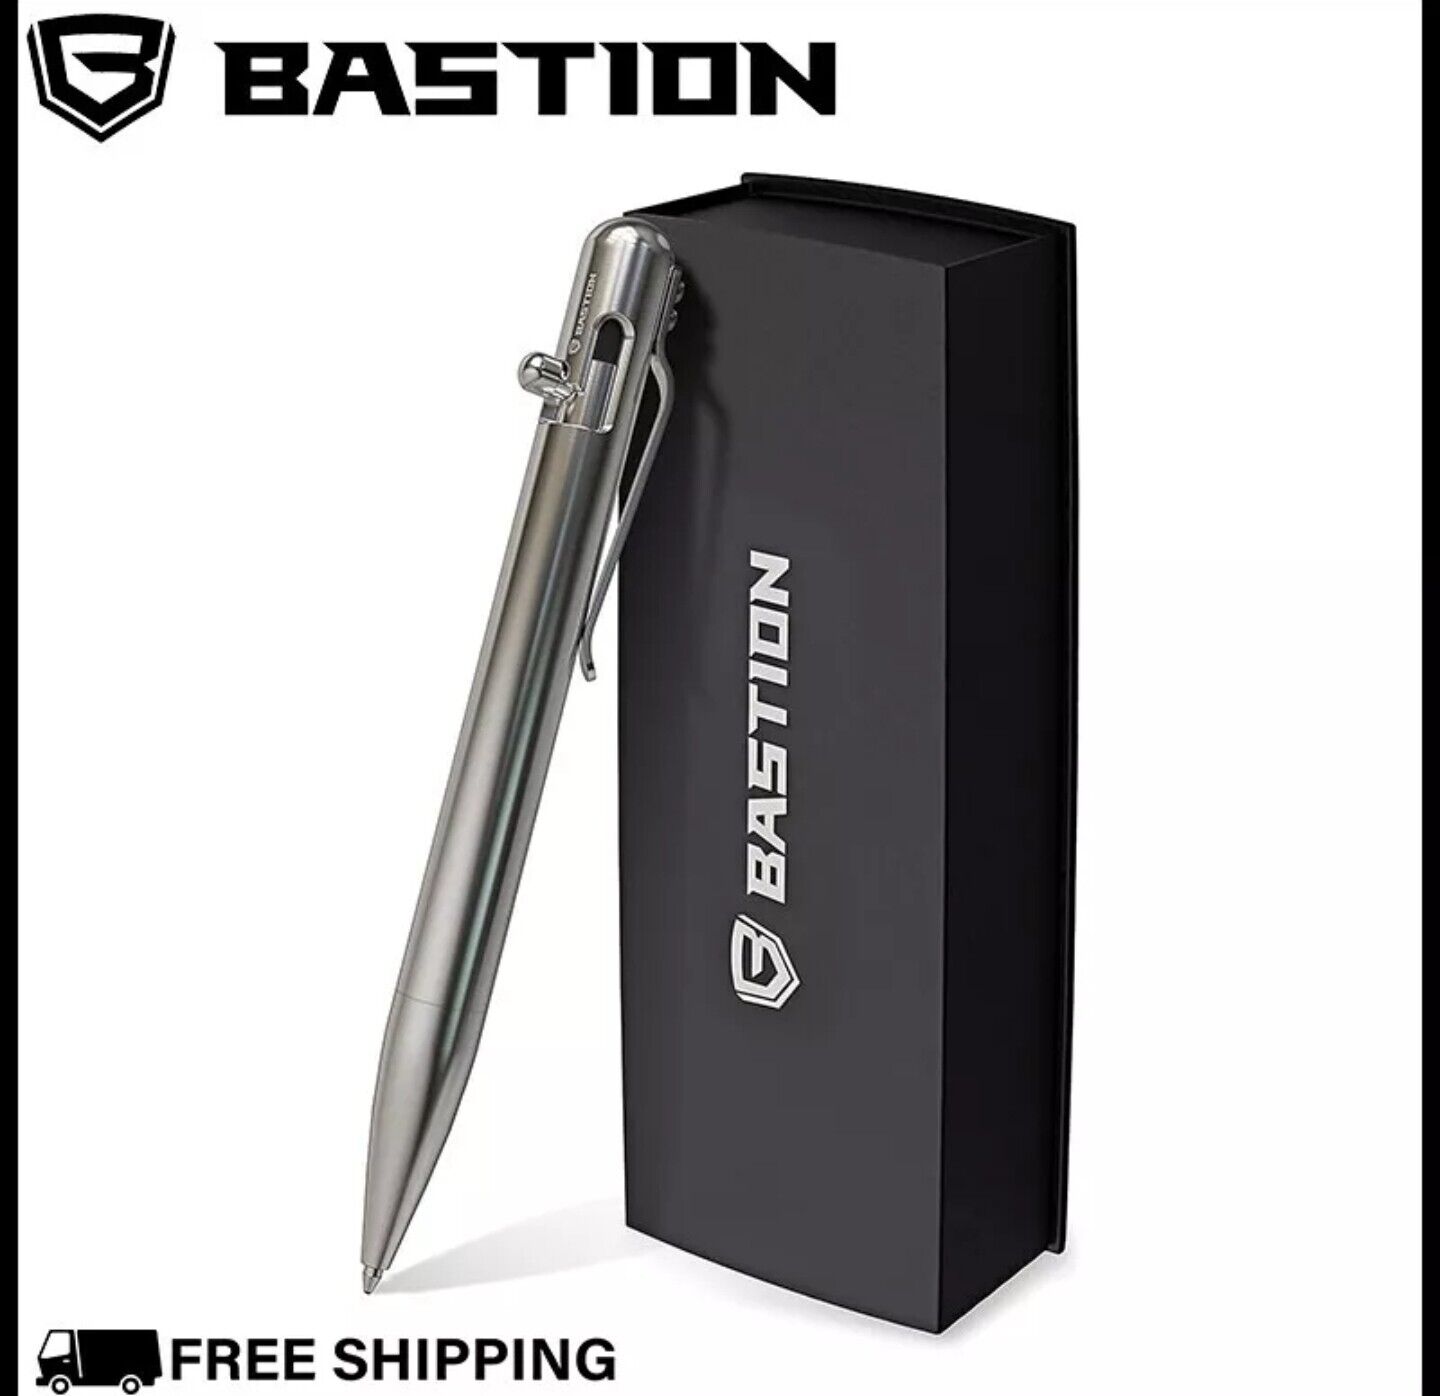 BASTION BOLT ACTION PEN Carbon Fiber Stainless Metal Luxury Executive Office New